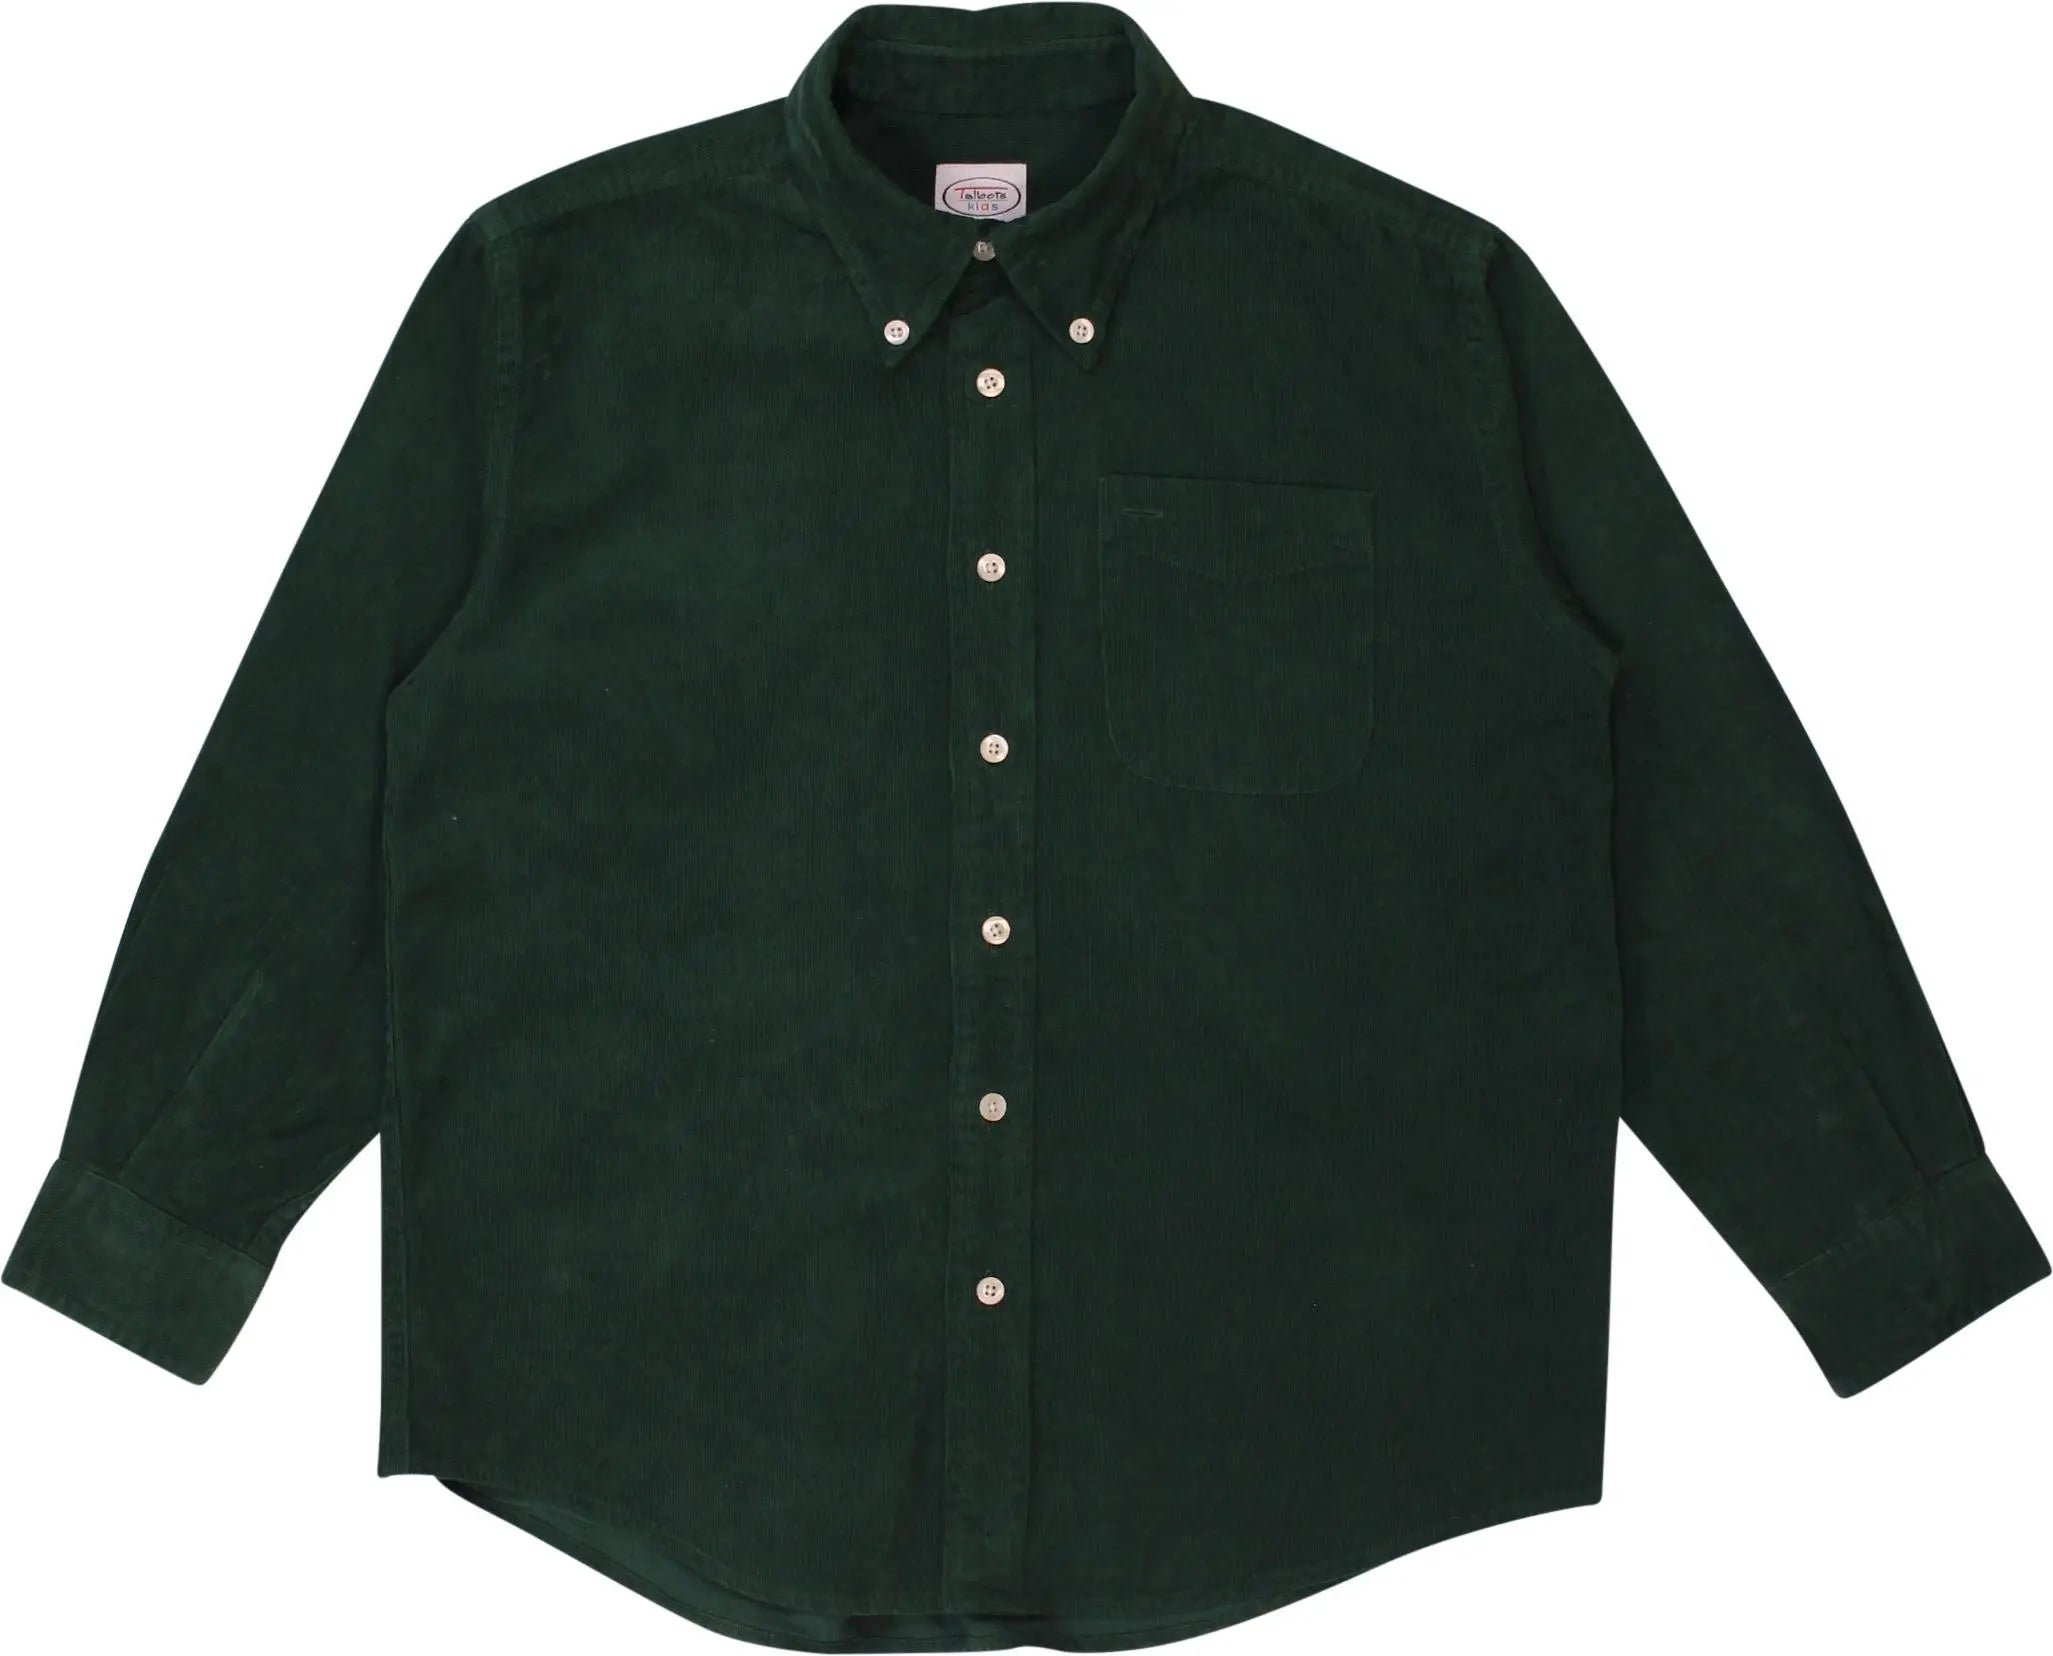 Talbots Kids - Green Corduroy Shirt- ThriftTale.com - Vintage and second handclothing